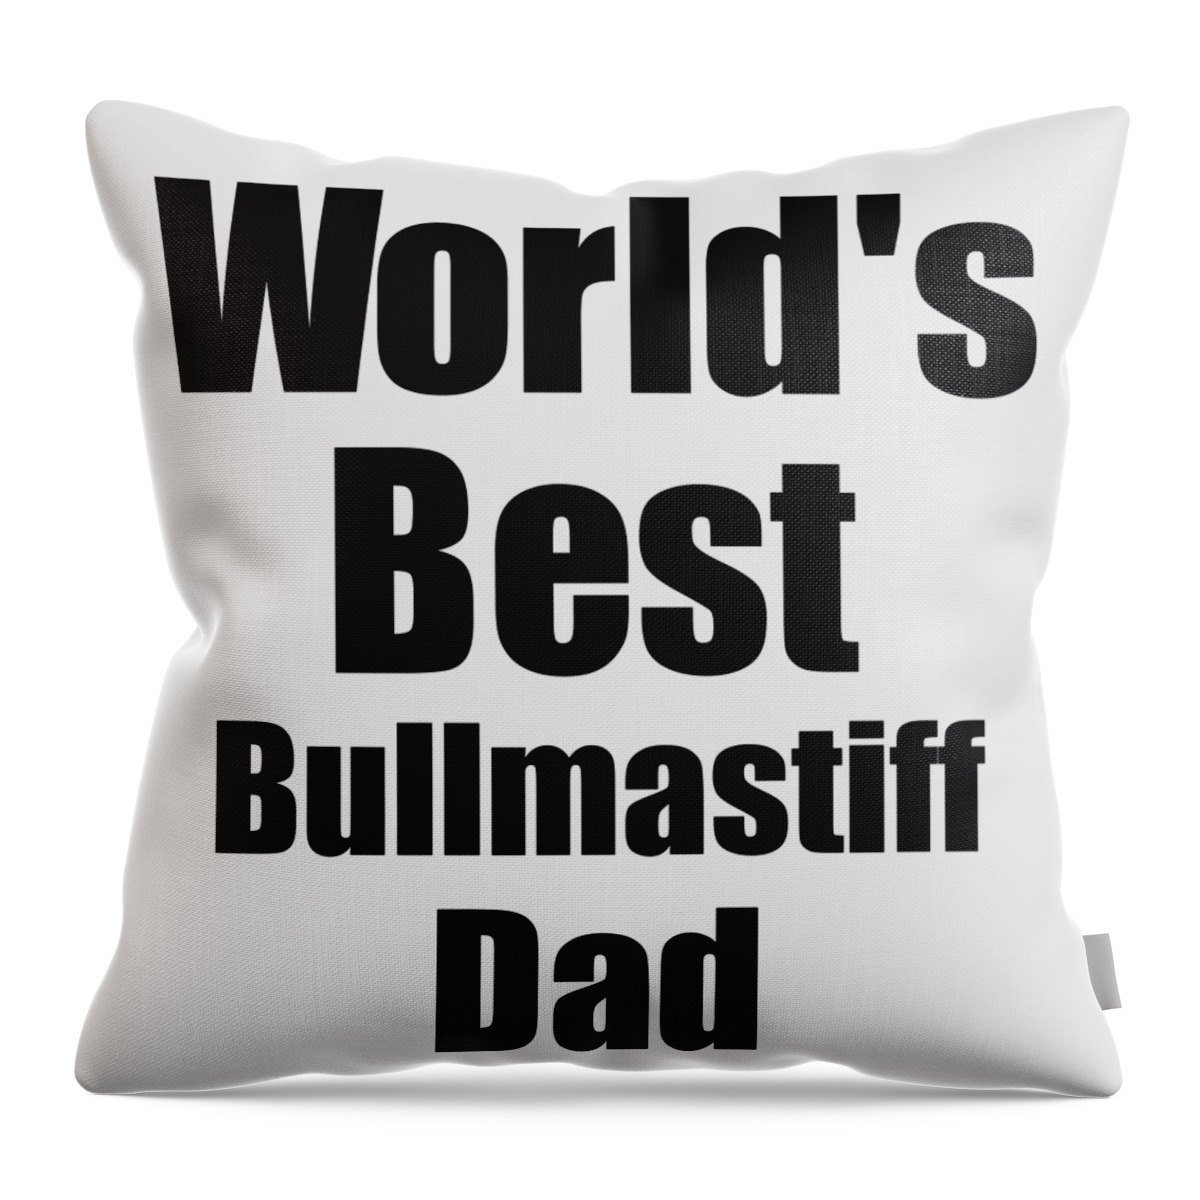 Bullmastiff Dad Throw Pillow featuring the digital art Bullmastiff Dad Dog Lover World's Best Funny Gift Idea For My Pet Owner by Jeff Creation